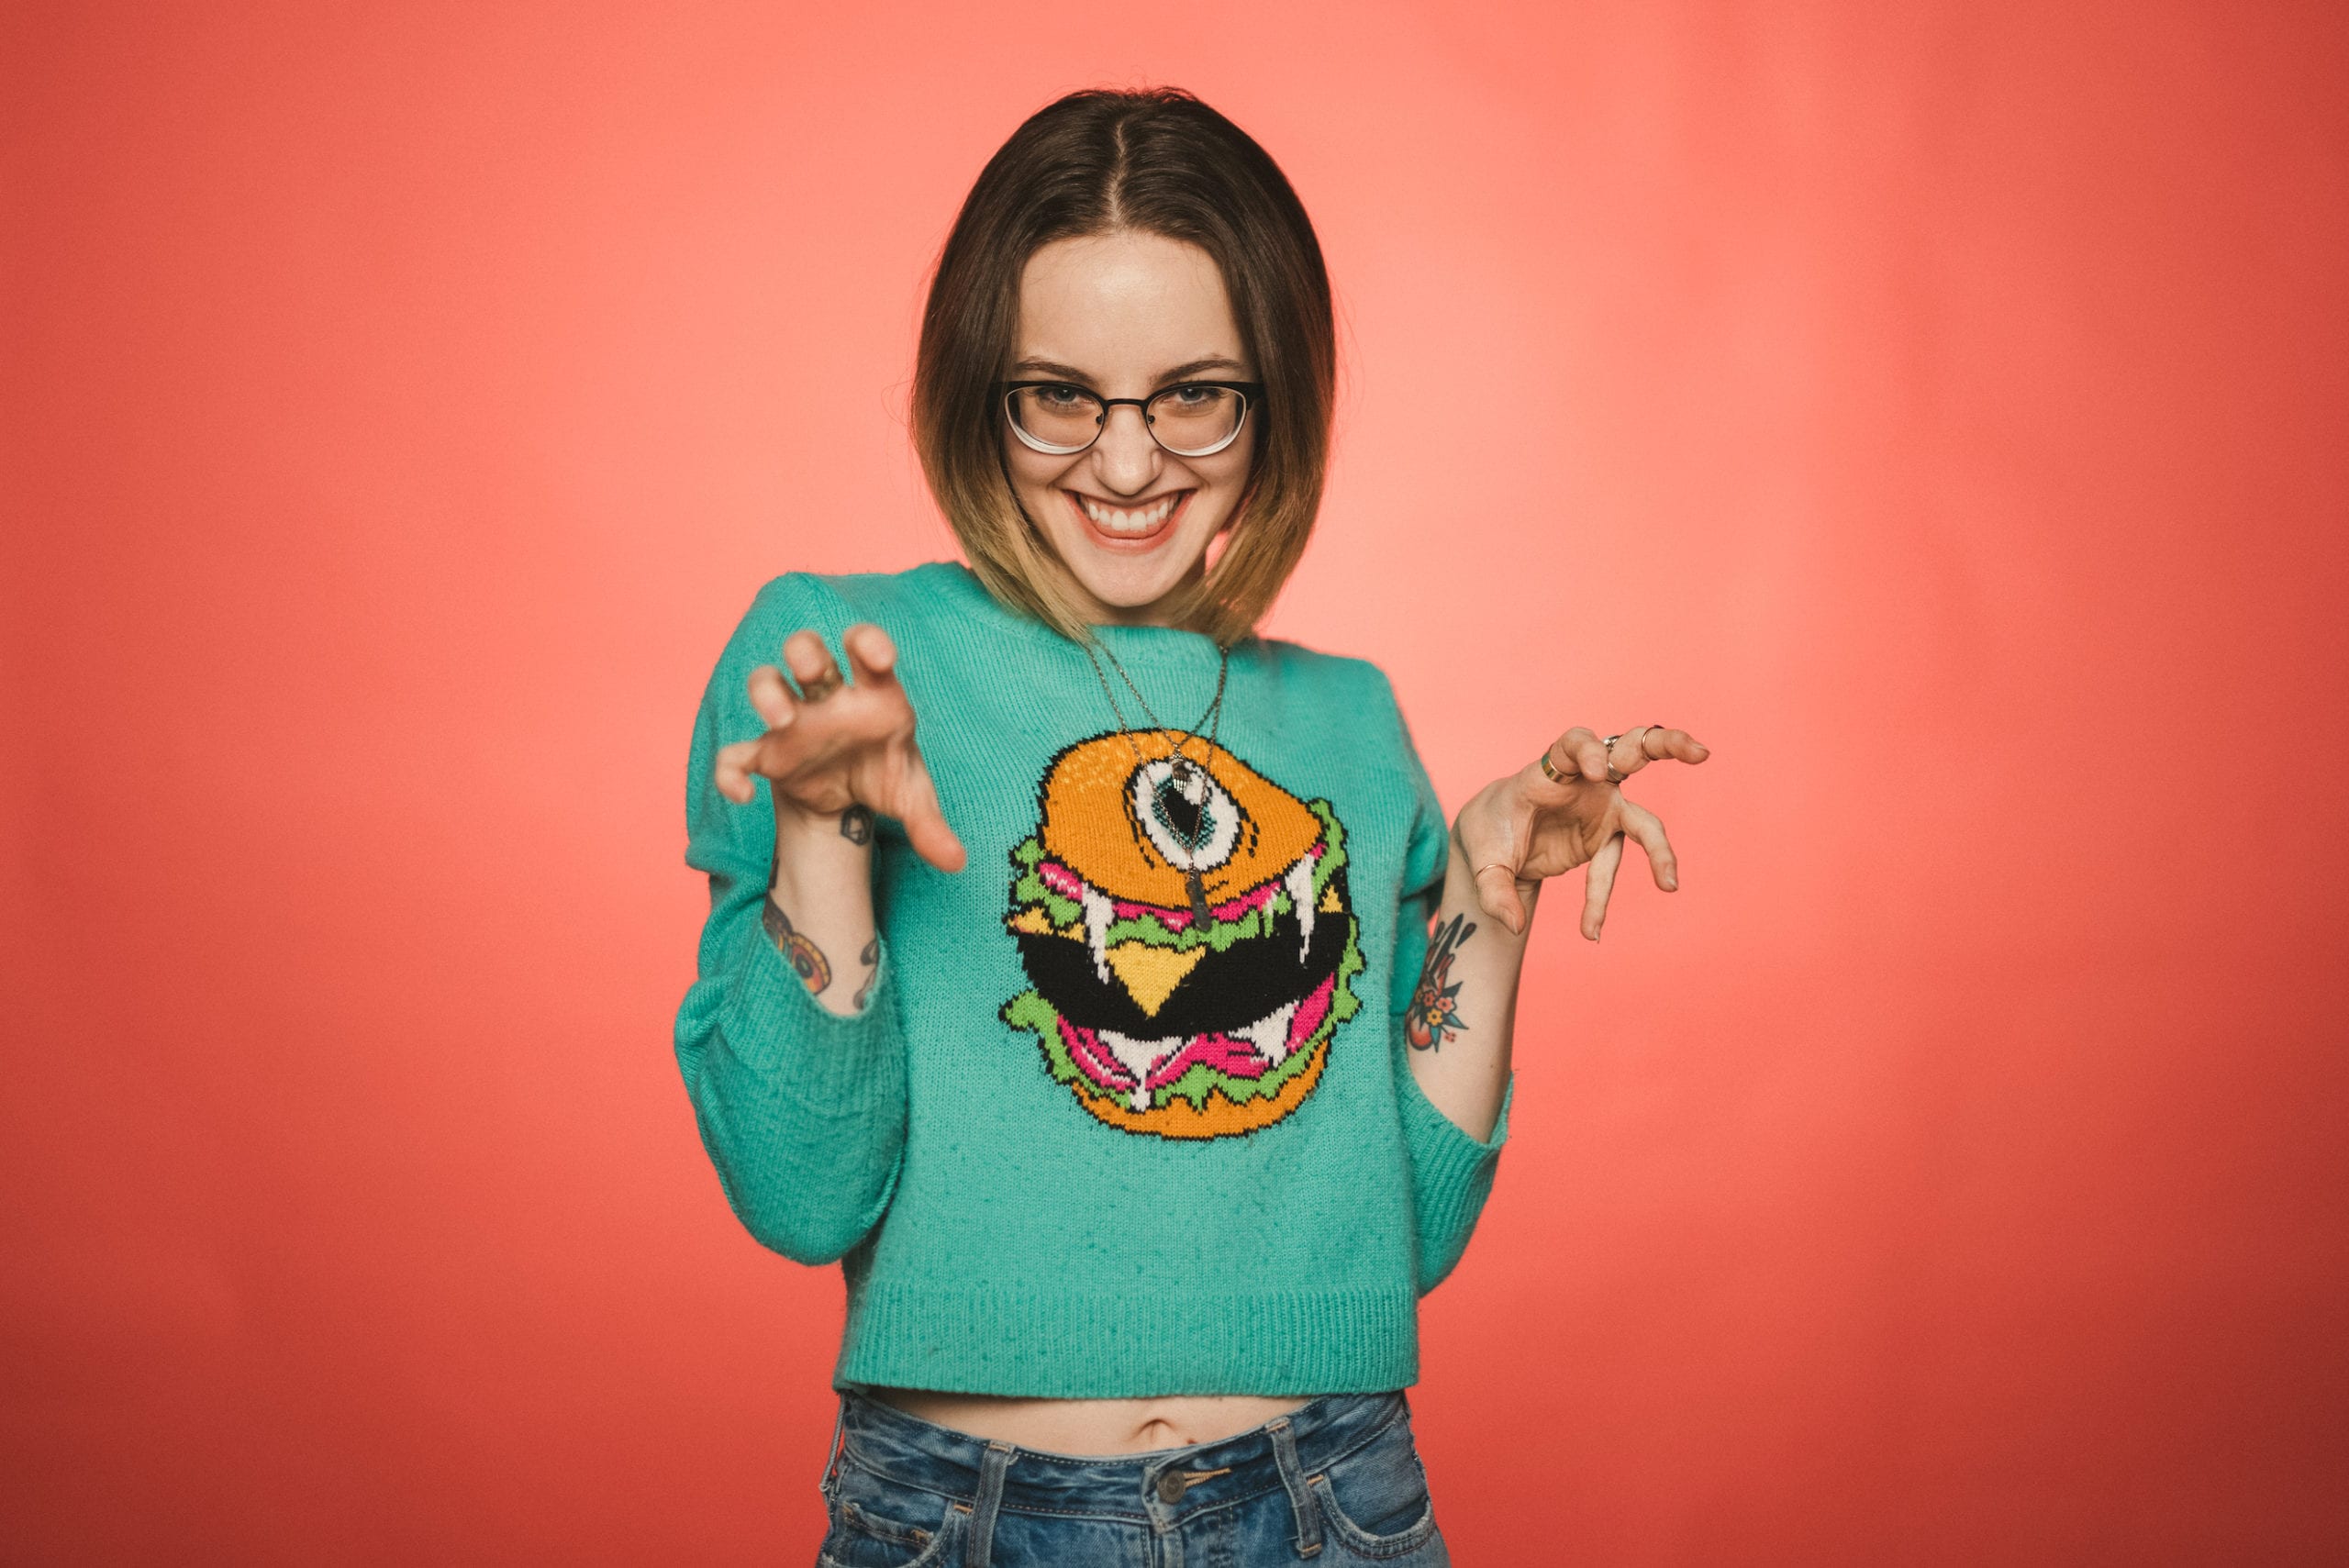 Heart Piece Media Day Woman with short brown hair wearing glasses posing with clawed hands wearing a turquoise sweater with a graphic of a hamburger with an eye on it